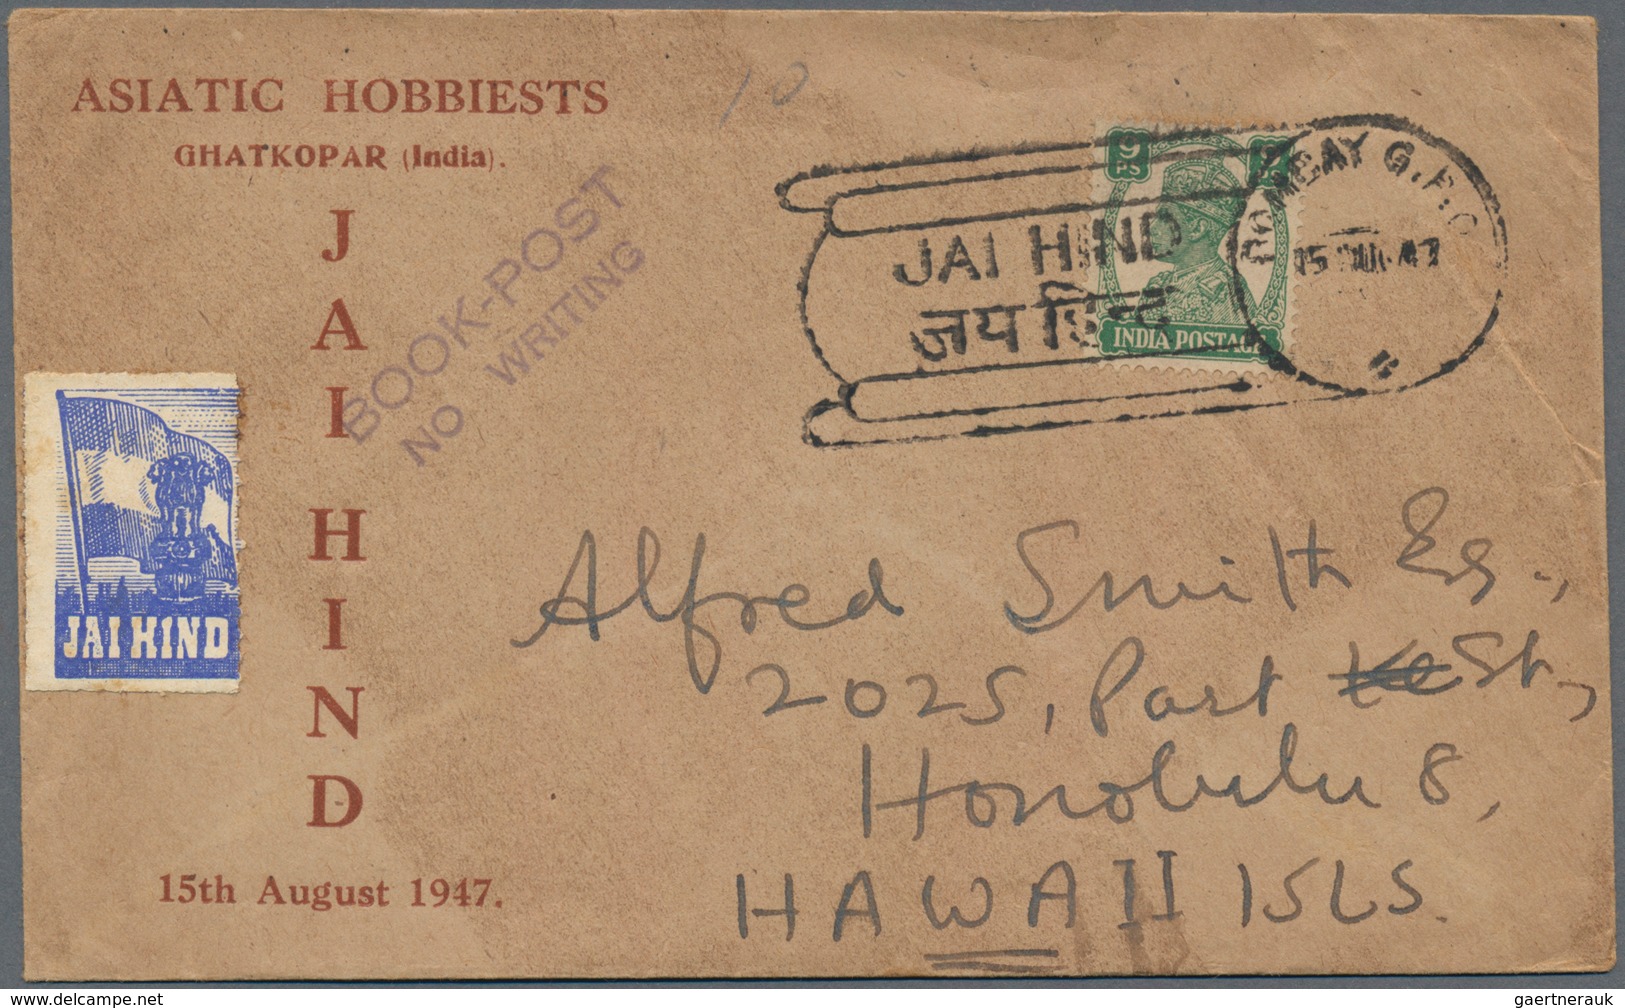 Indien: 1911/1947: Three covers and a wrapper bearing SPECIAL CANCELLATIONS, with two different date